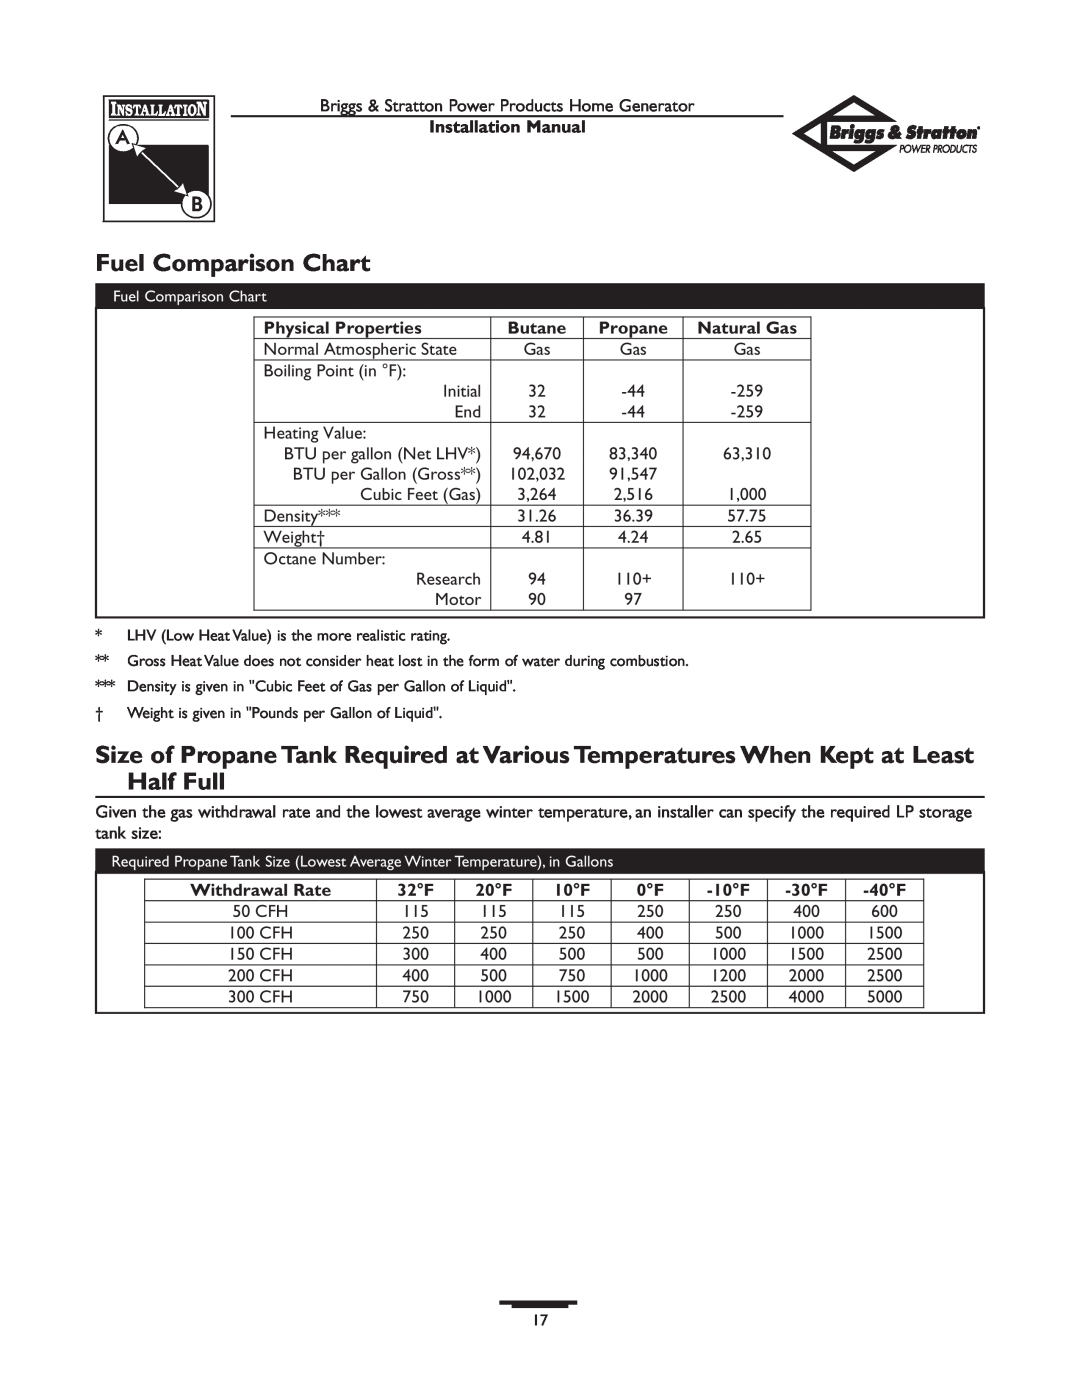 Briggs & Stratton 01938-0 manual Fuel Comparison Chart, Physical Properties, Butane, Propane, Natural Gas, Withdrawal Rate 